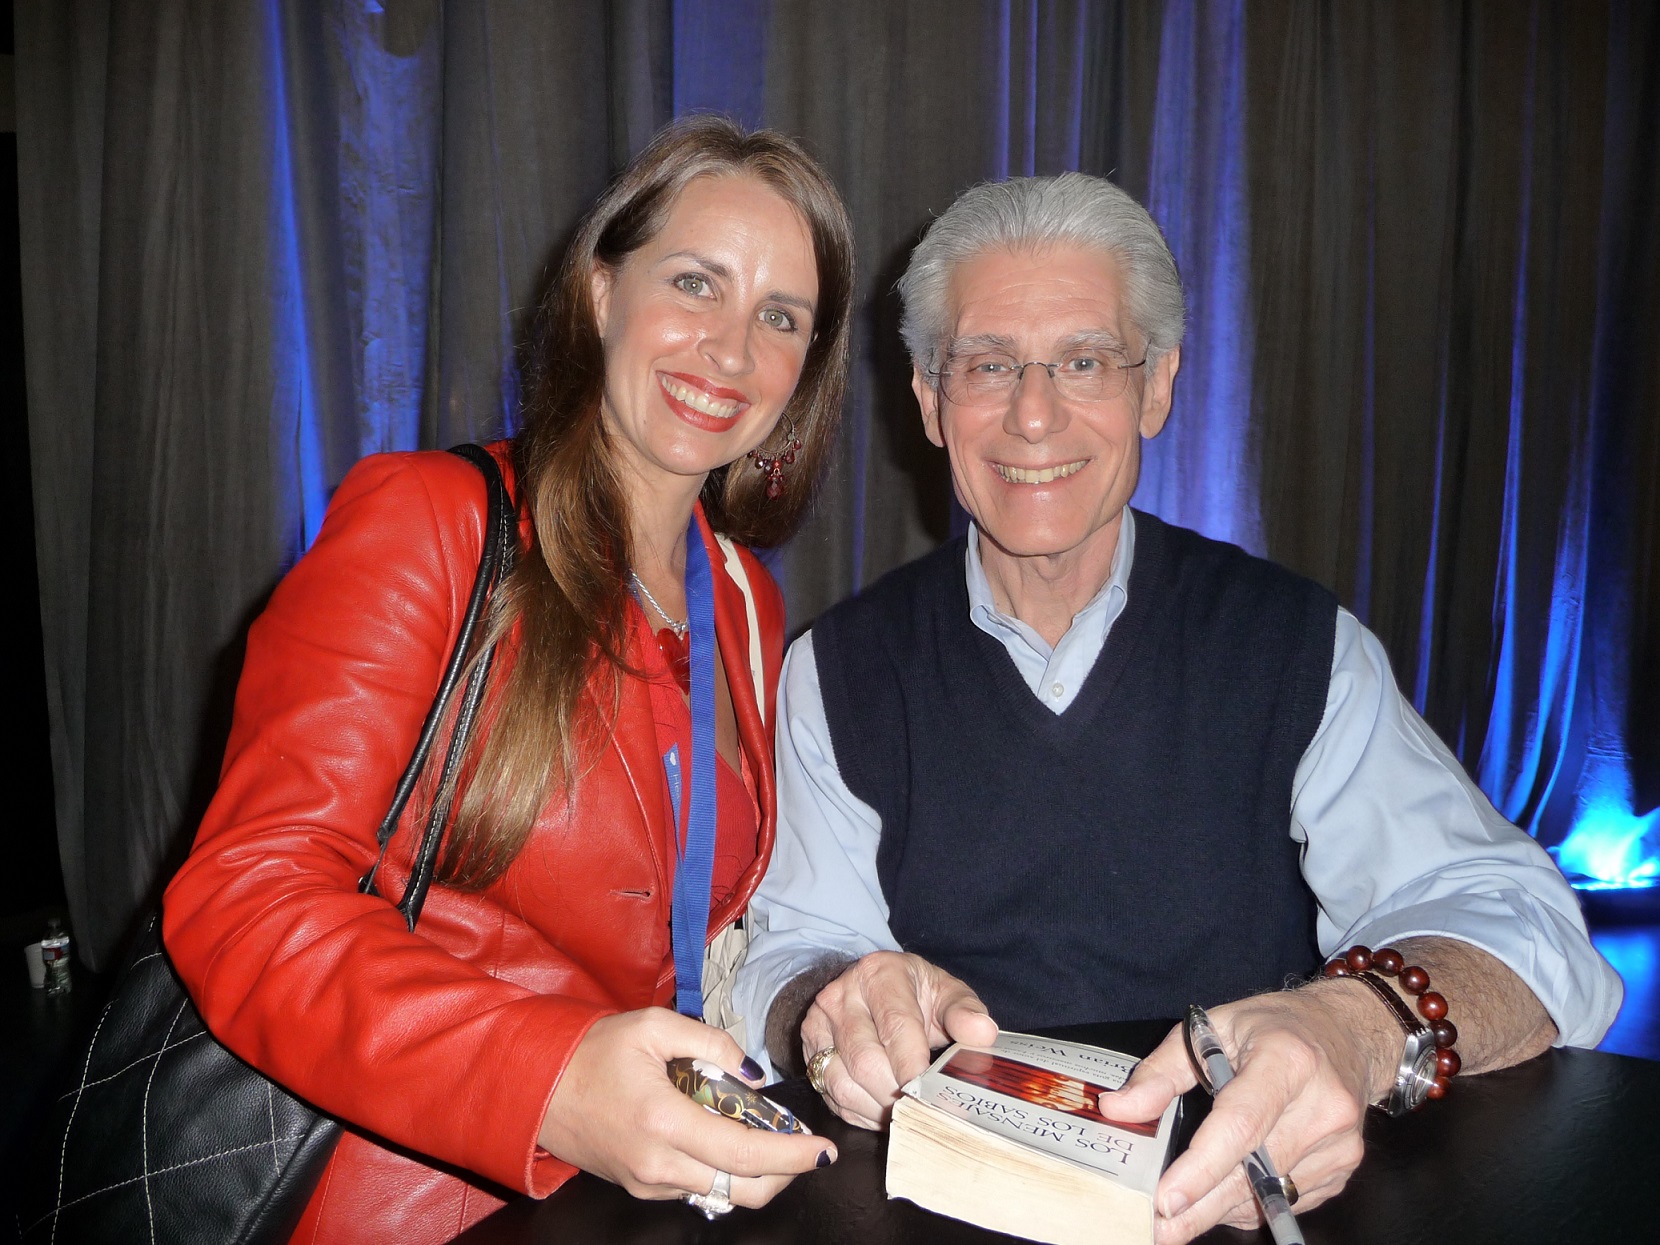 Brian Weiss MD 2010